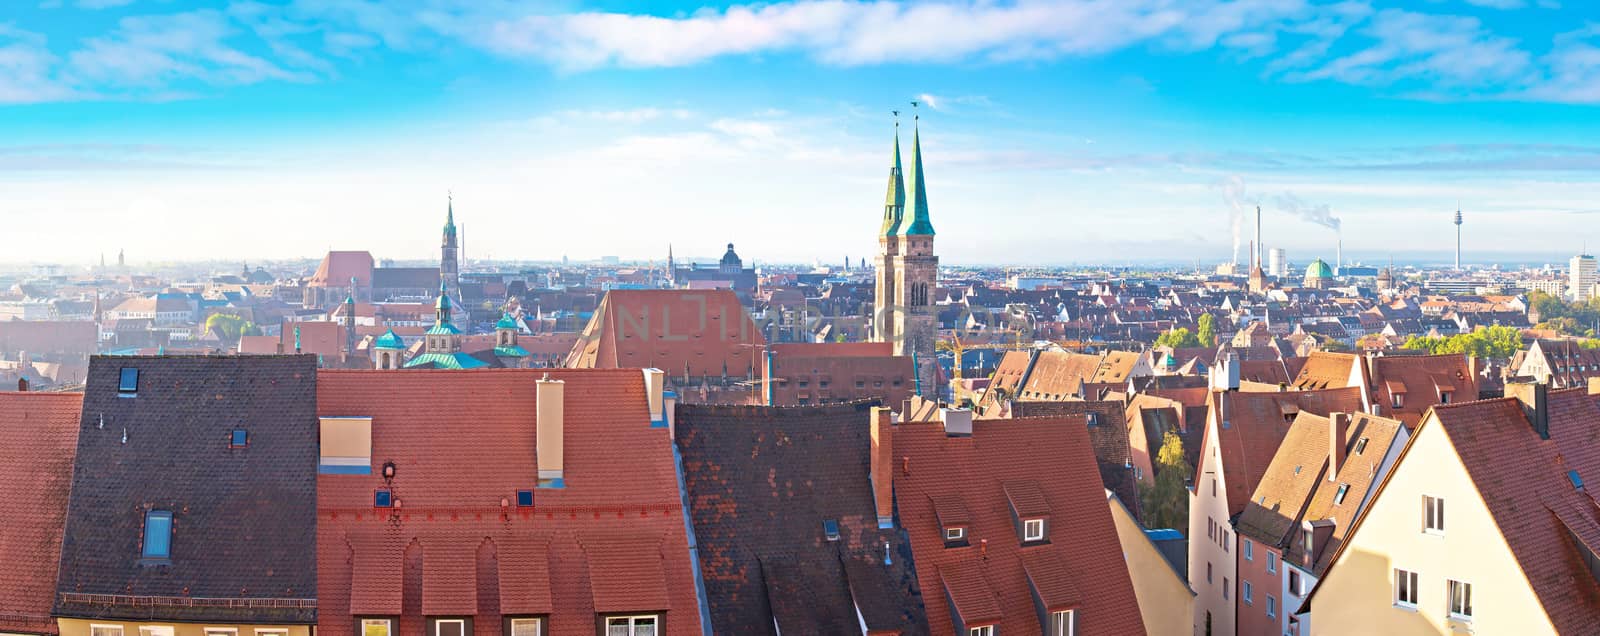 Nurnberg. Rooftops and cityscape of Nuremberg old town panoramic by xbrchx